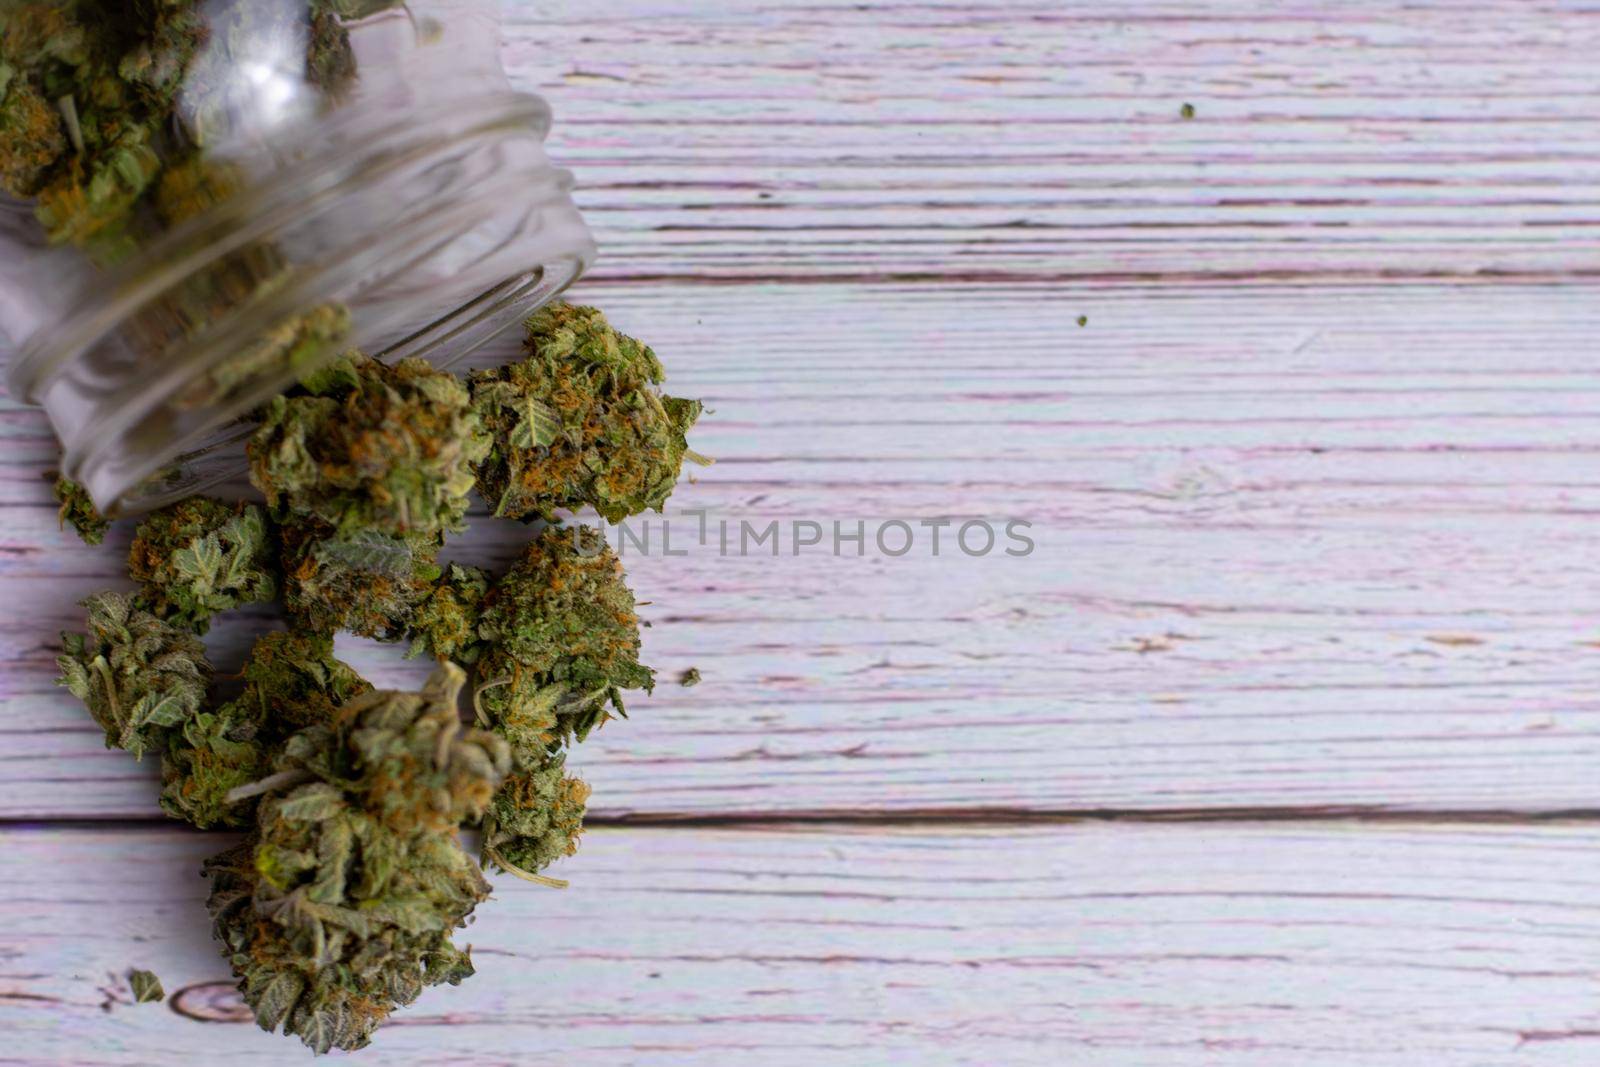 Looking down on a glass mason jar with orange and green cannabis nugs pouring out of it on a wood background